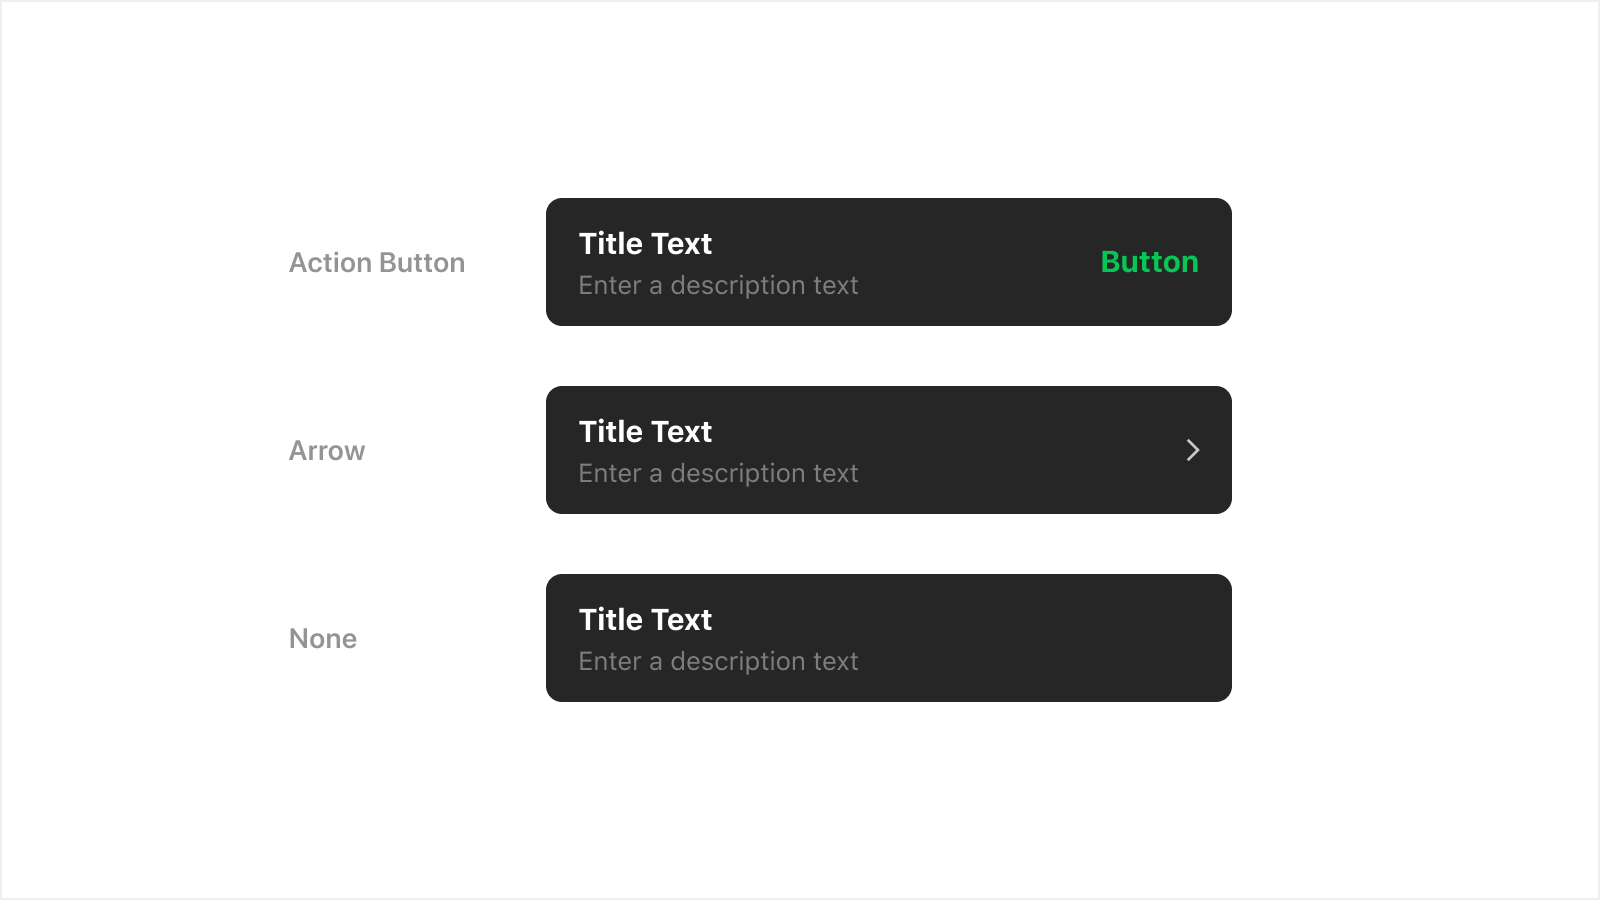 How to Design Snackbar Components in Figma  Material Design Snackbar  Component Tutorial 